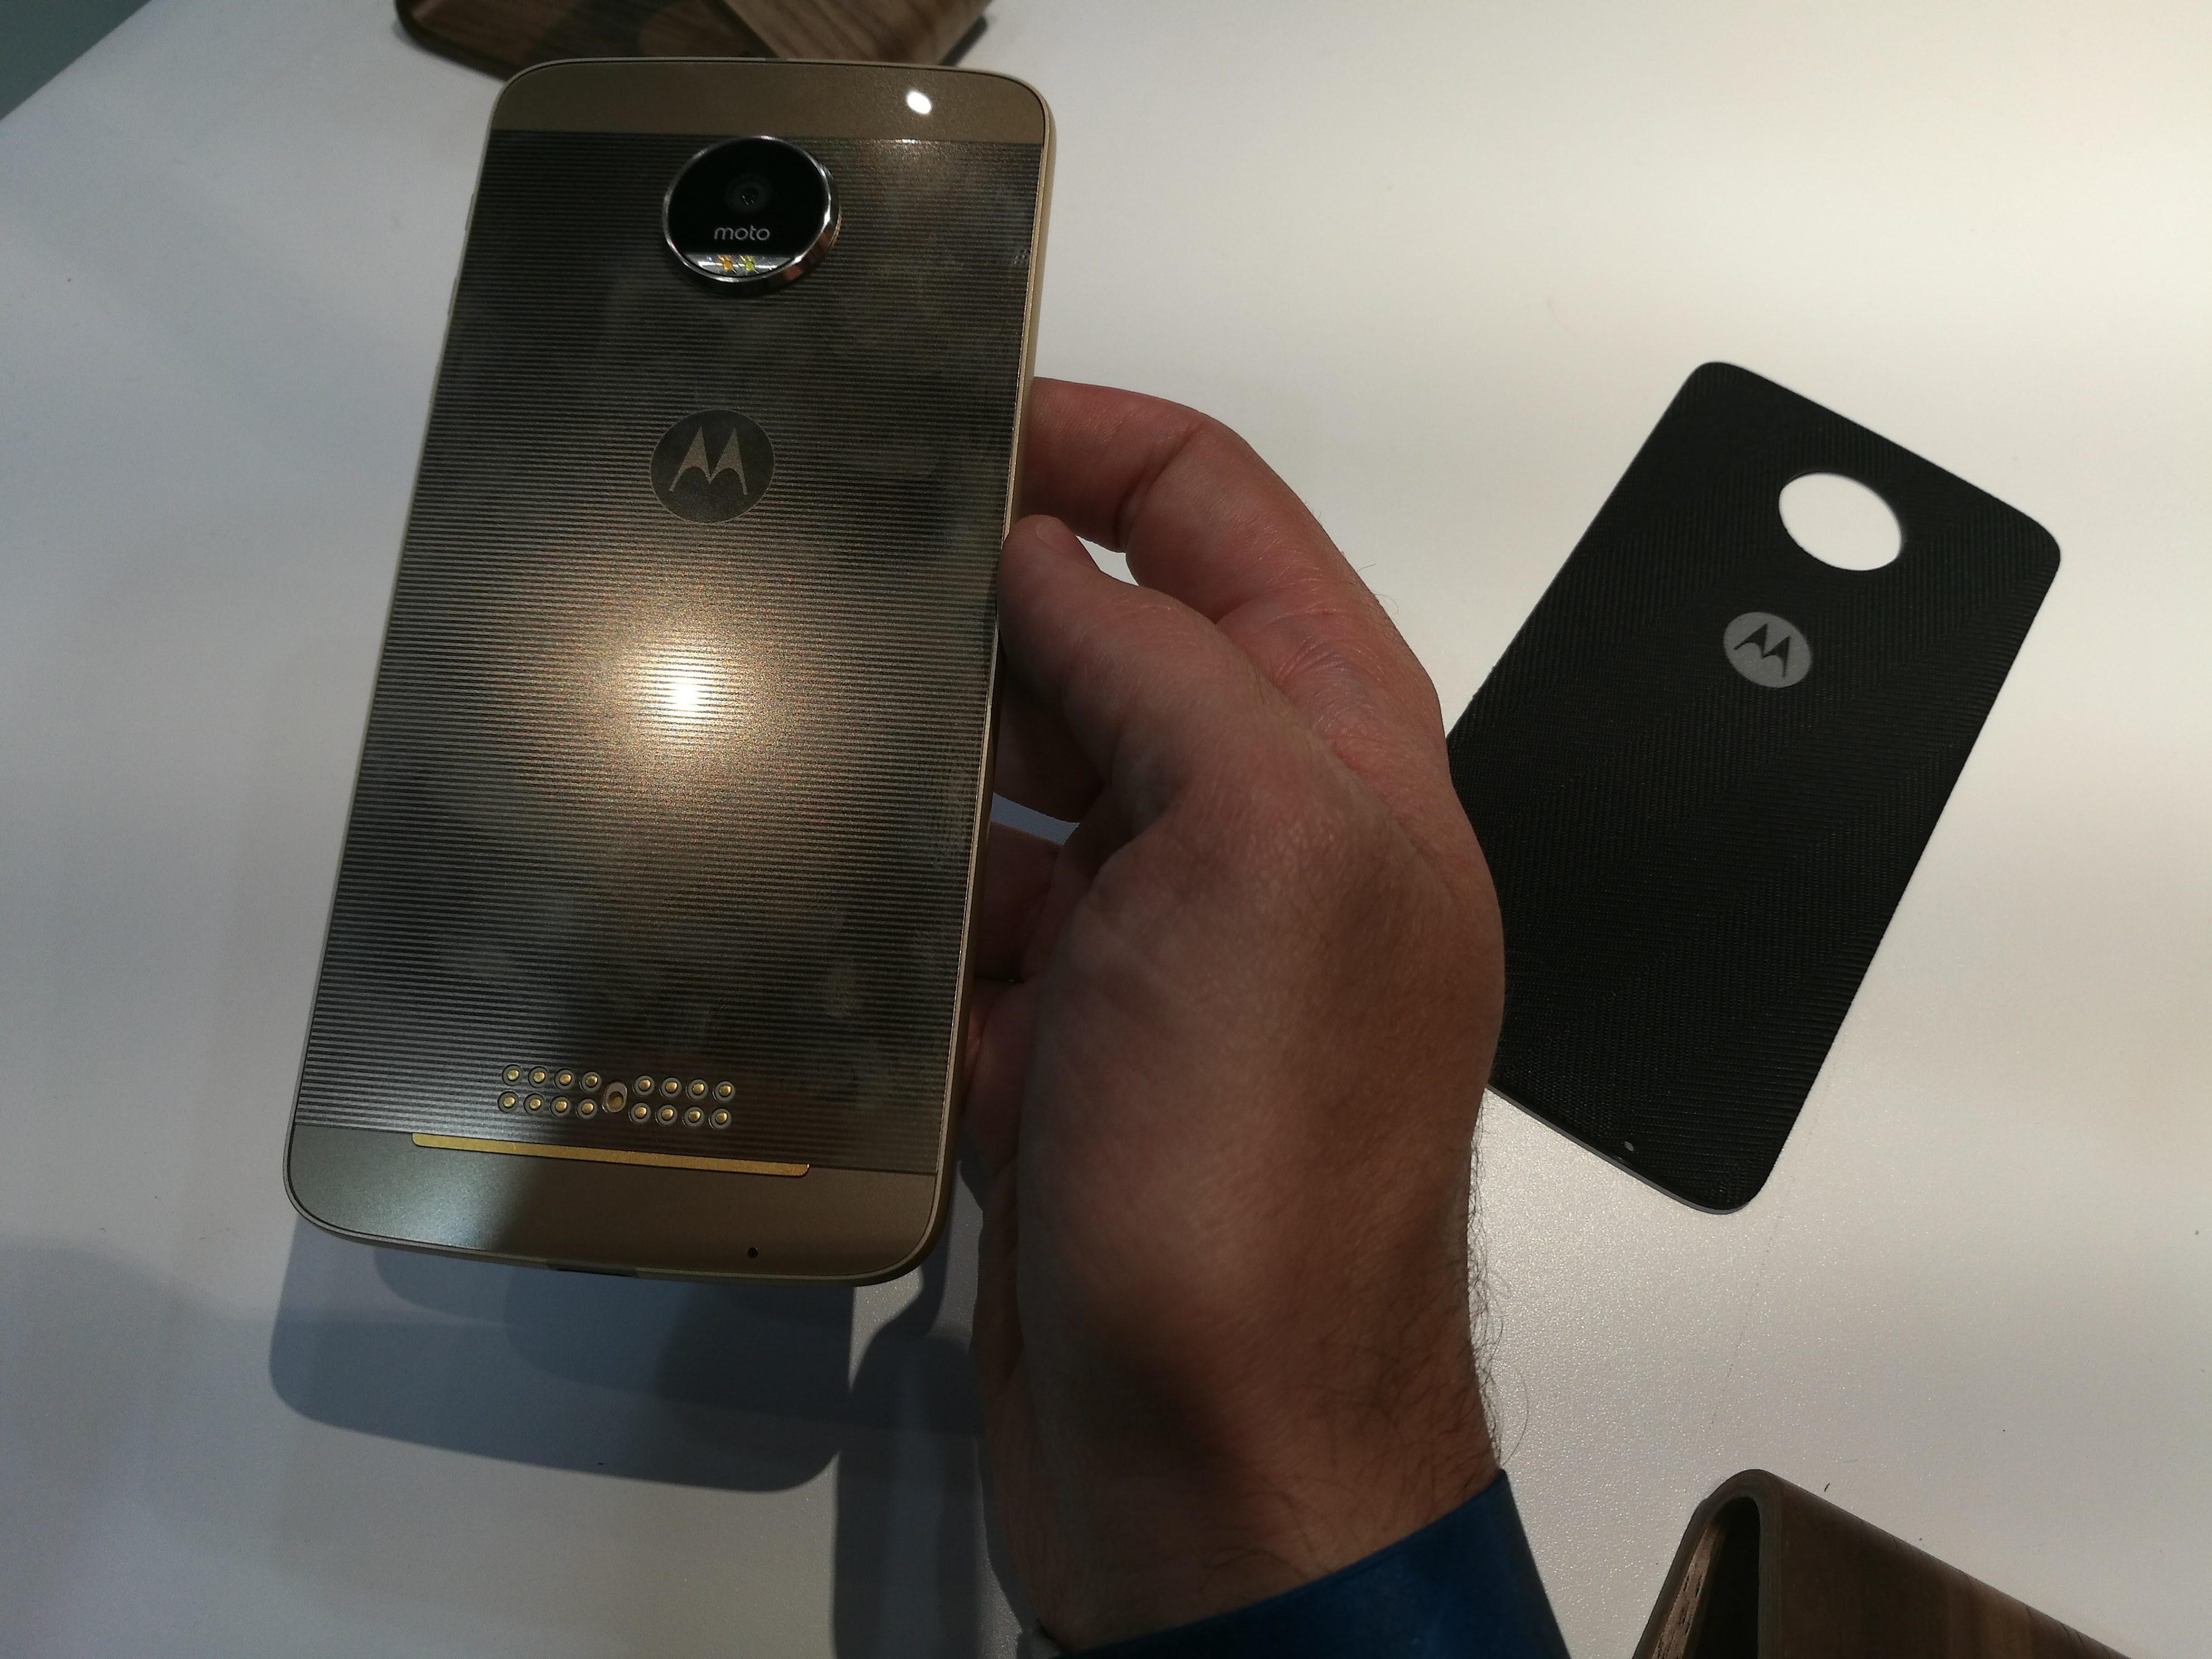 Lenovo's Moto Z, and an attachable backing on the right.